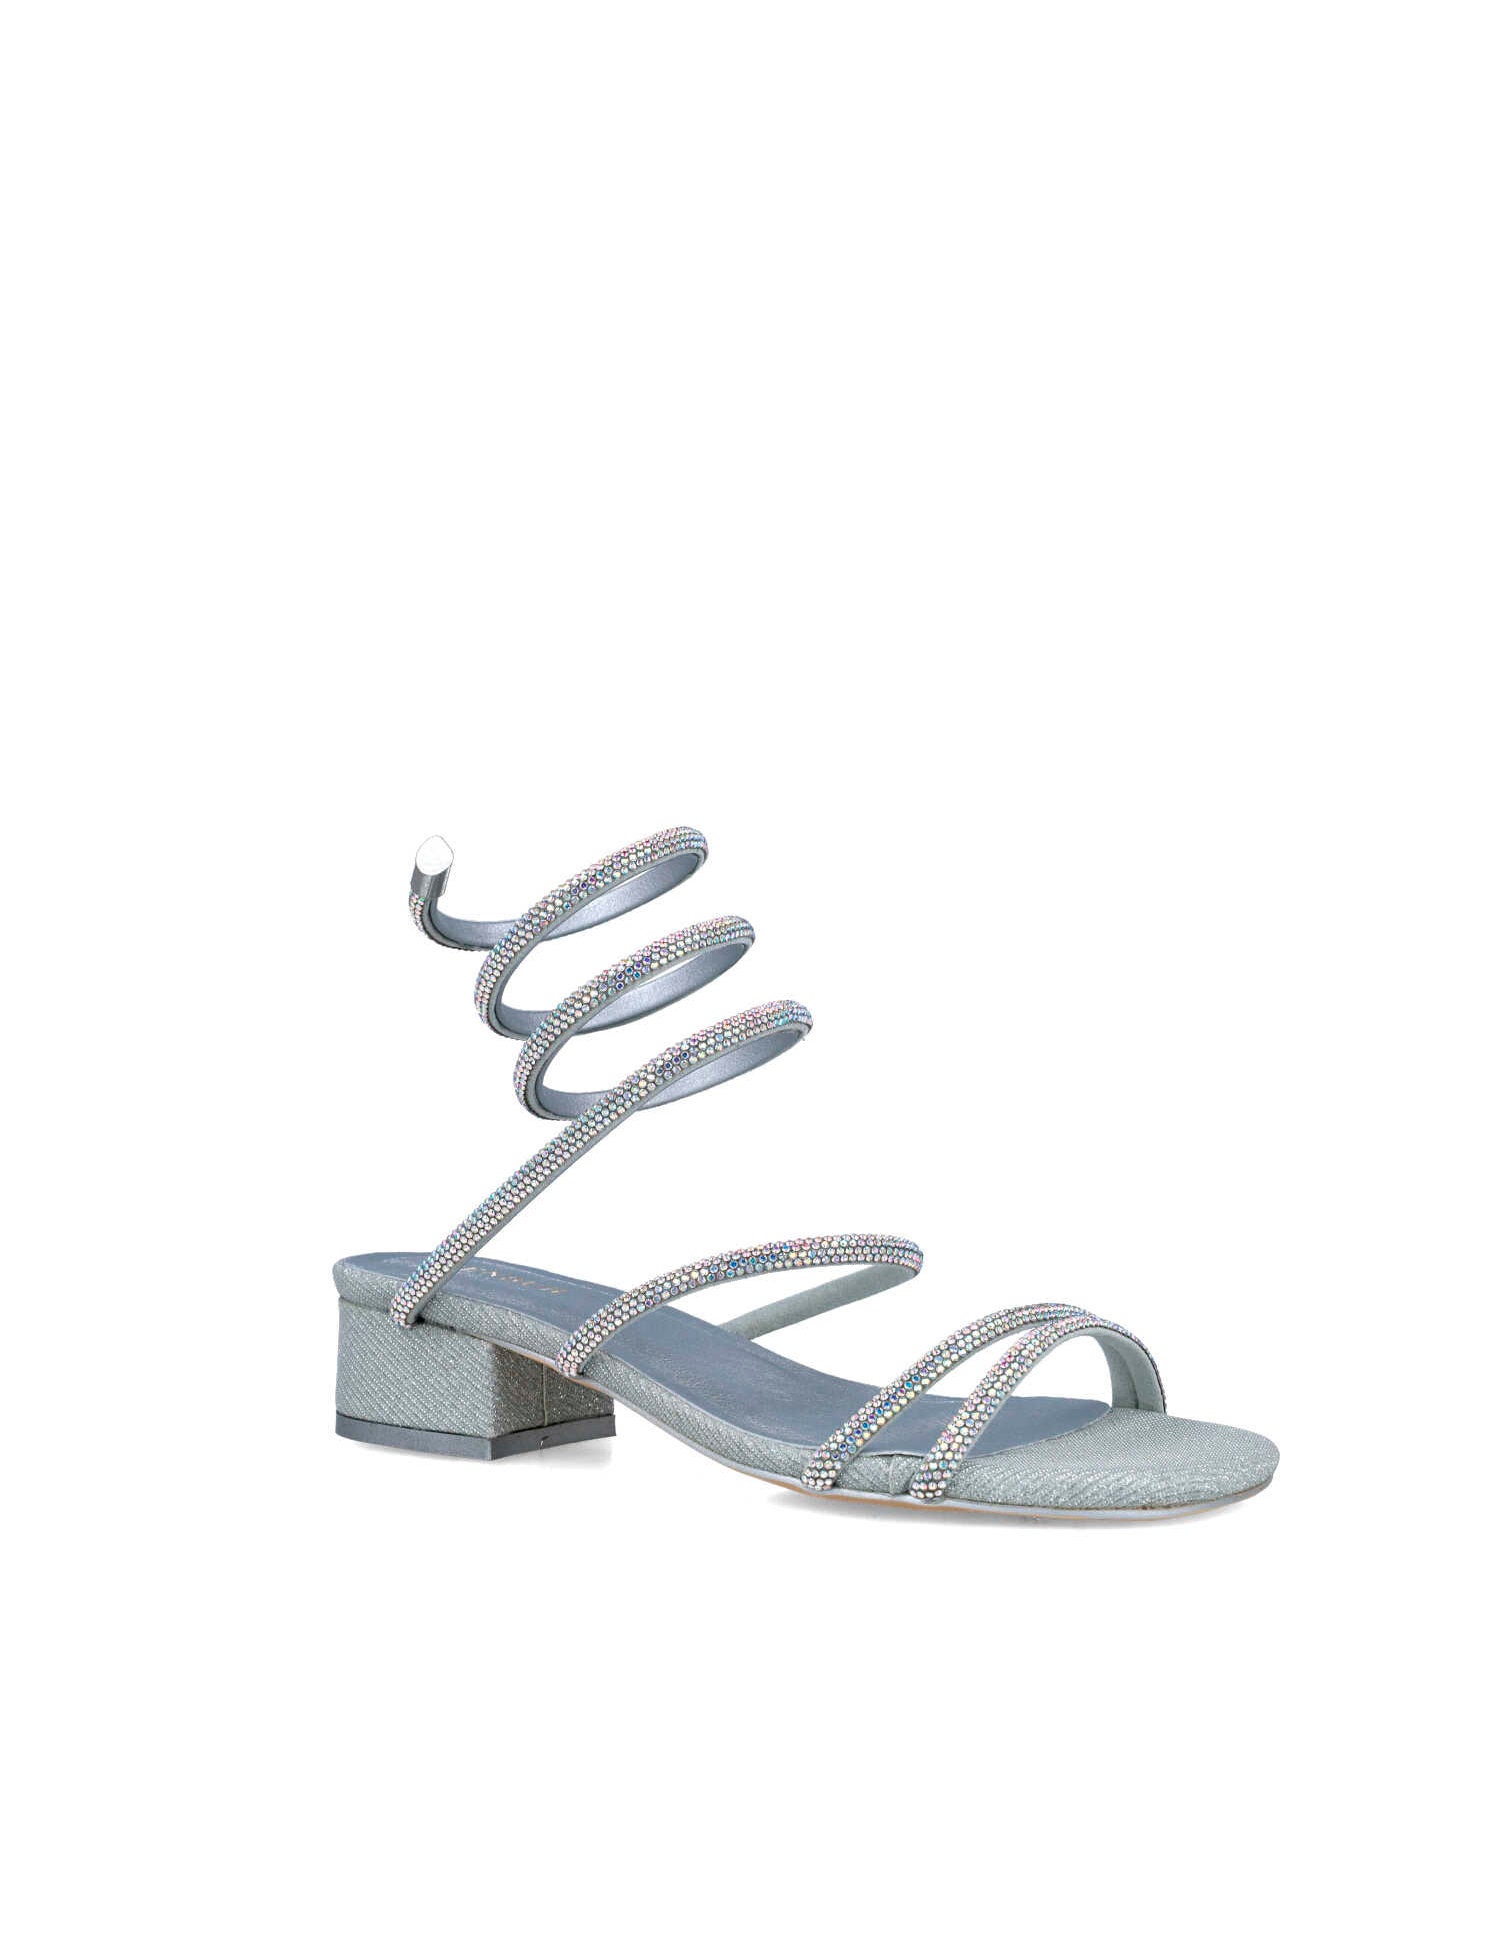 Silver Slippers With Embellished Wrap Strap_24722_09_02